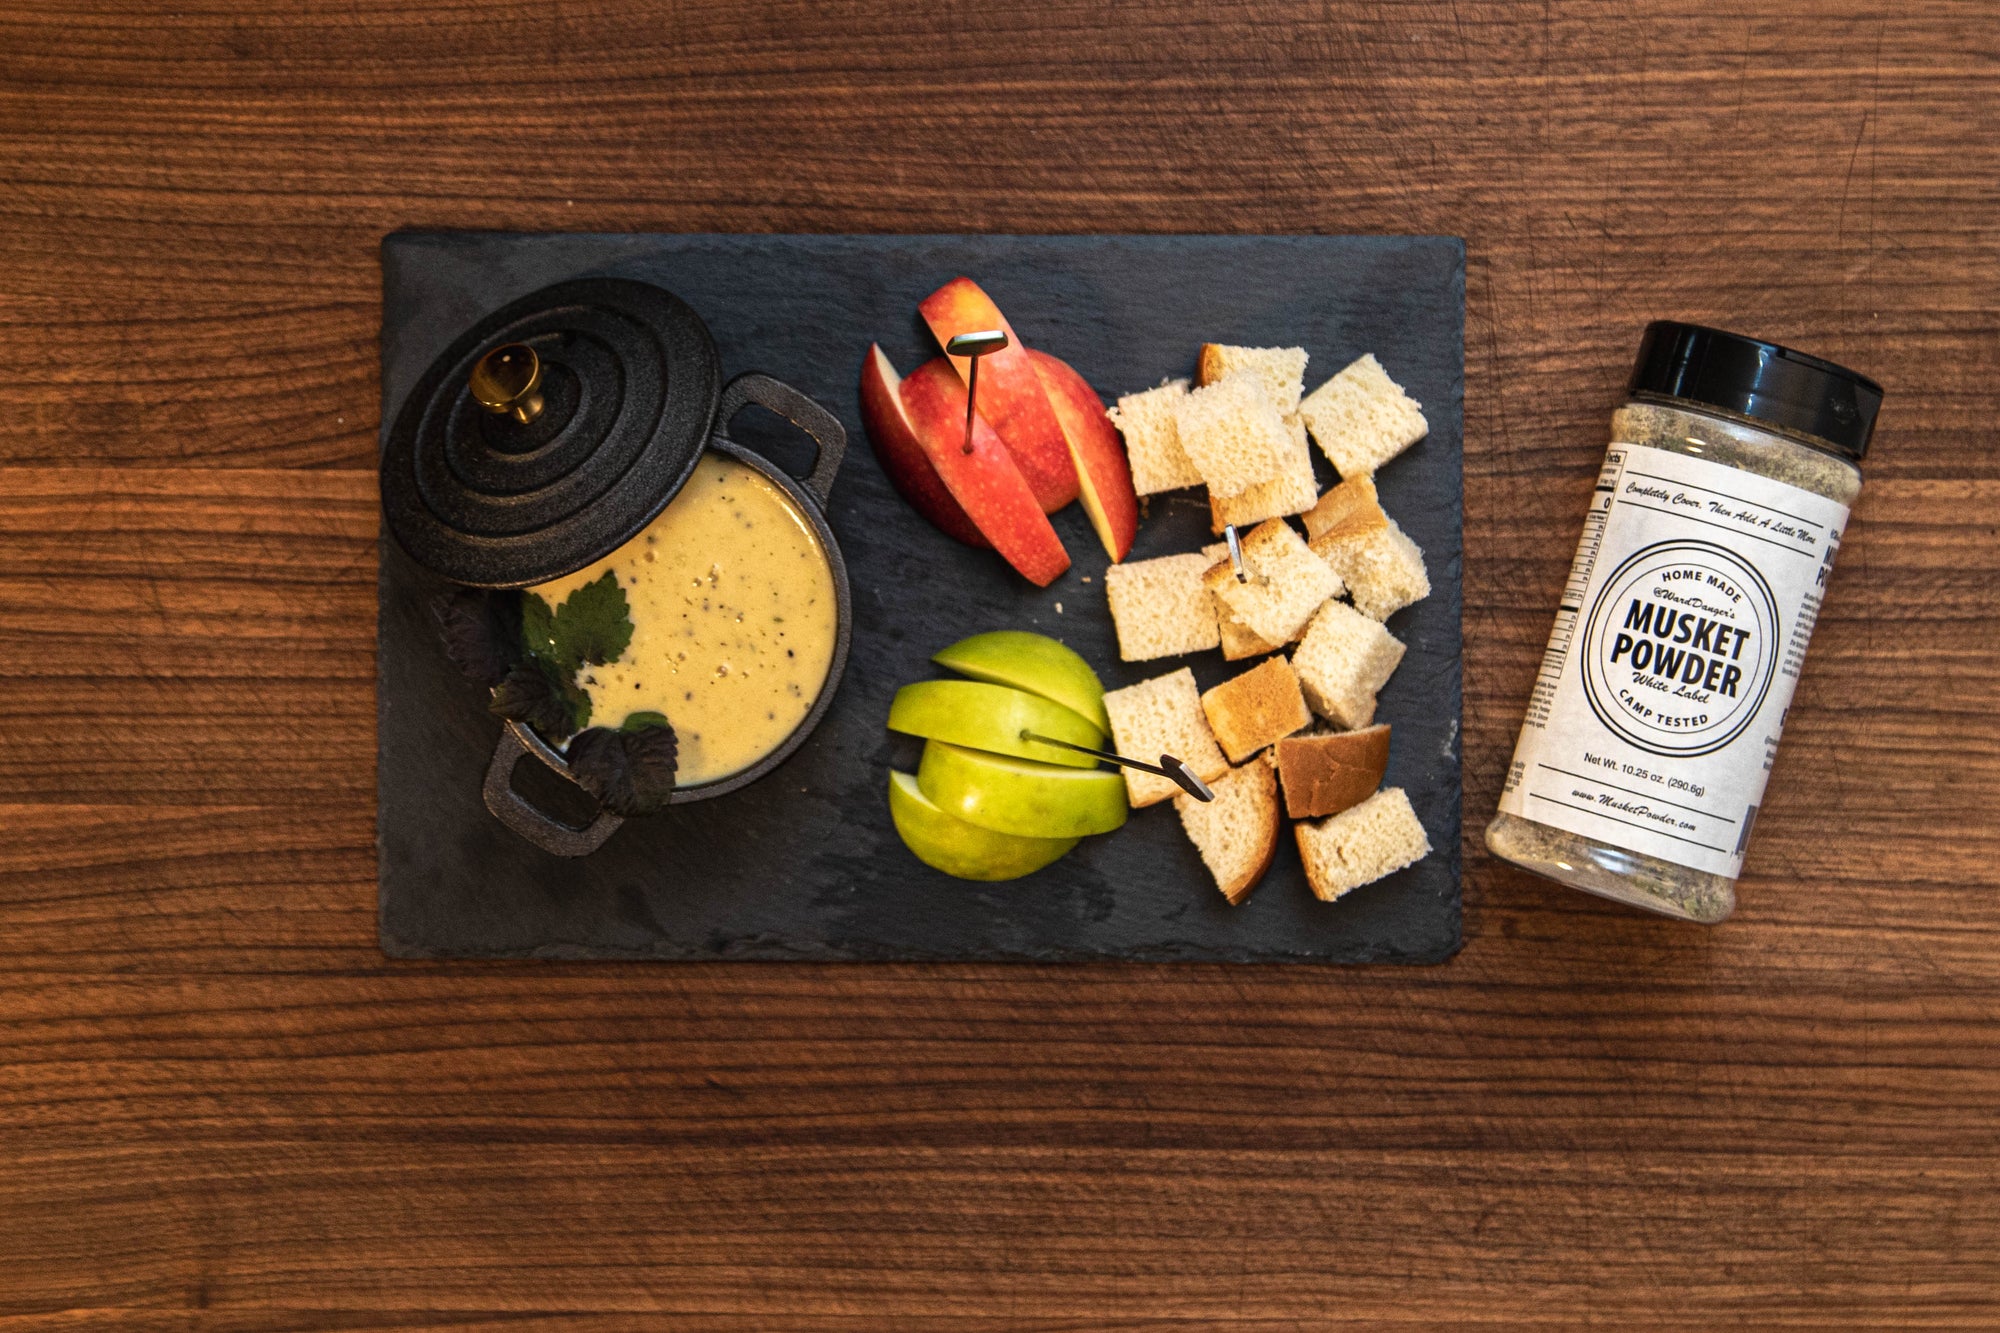 Beer Cheese Dip with White Label Musket Powder